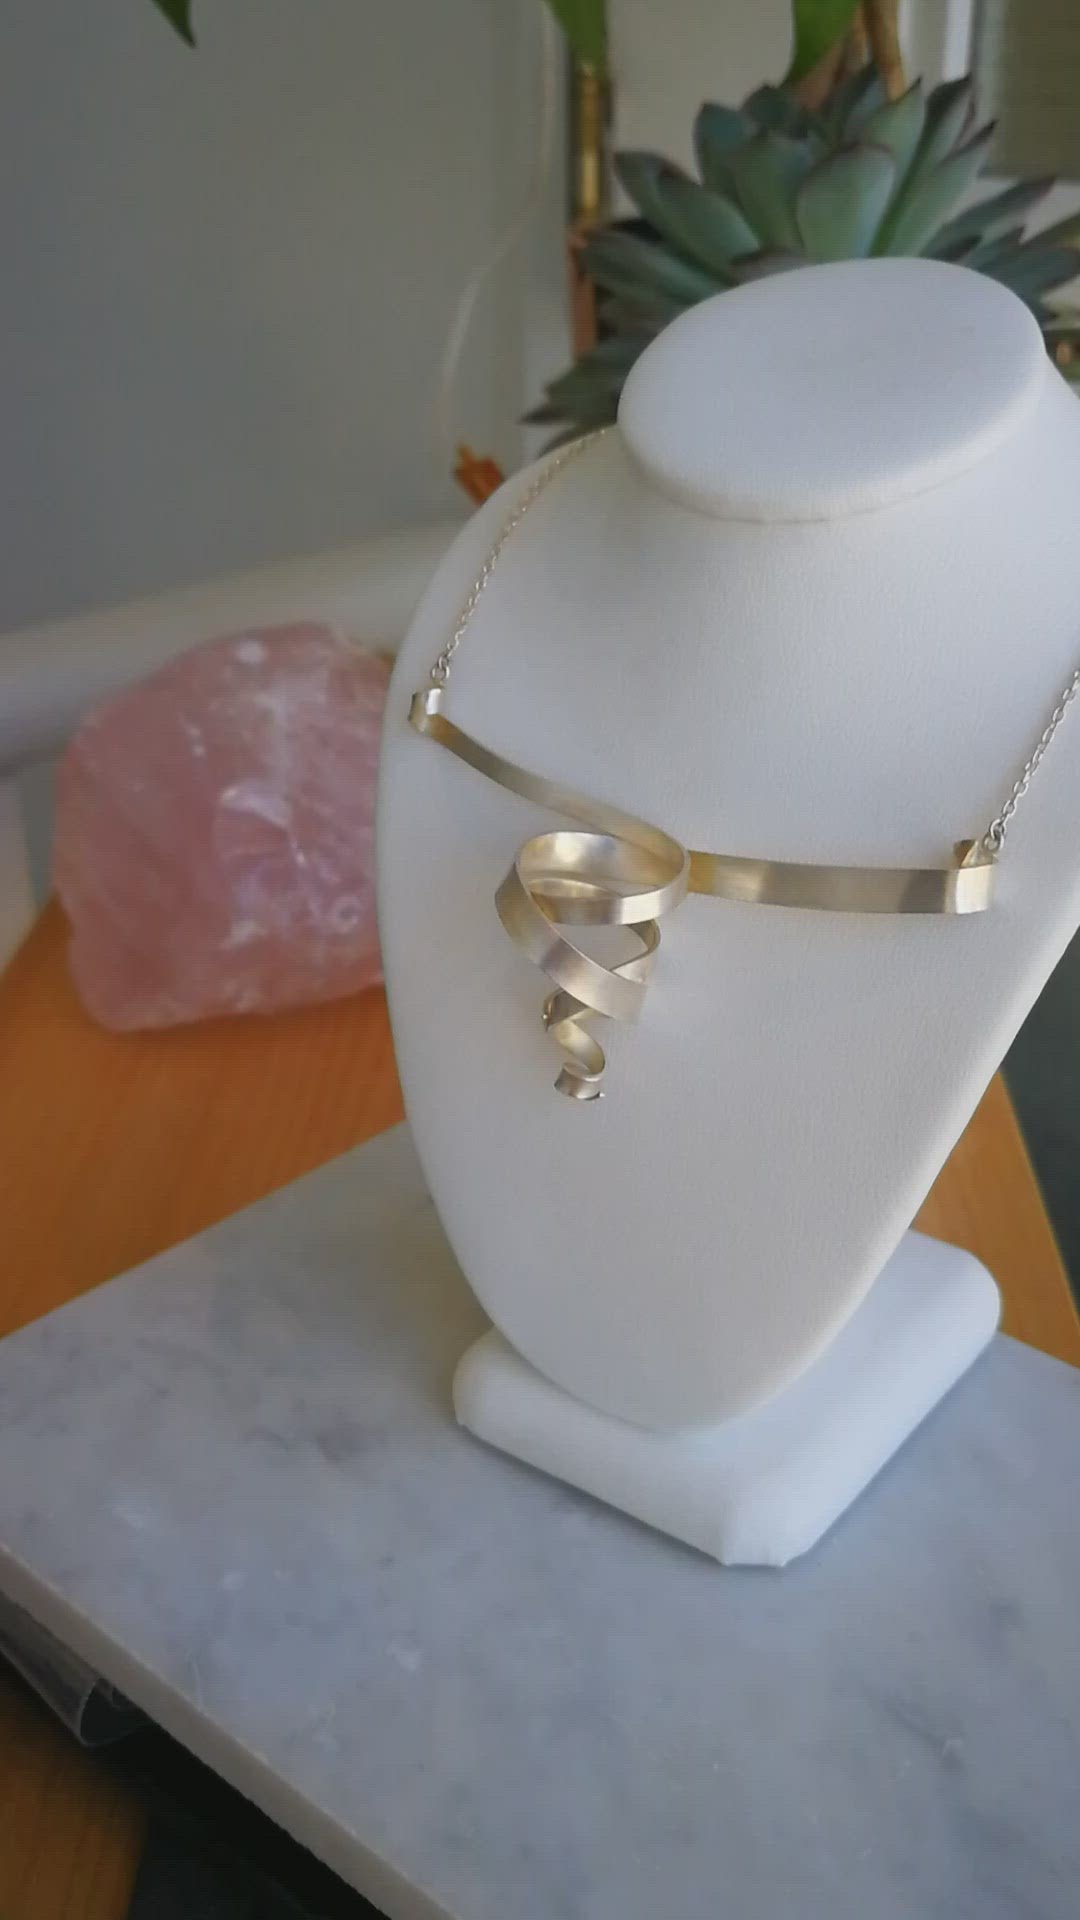 A video showing a sterling silver double spiral pendant necklace with a matte finish and silver chain on jewellery stand beside a potted succulent.